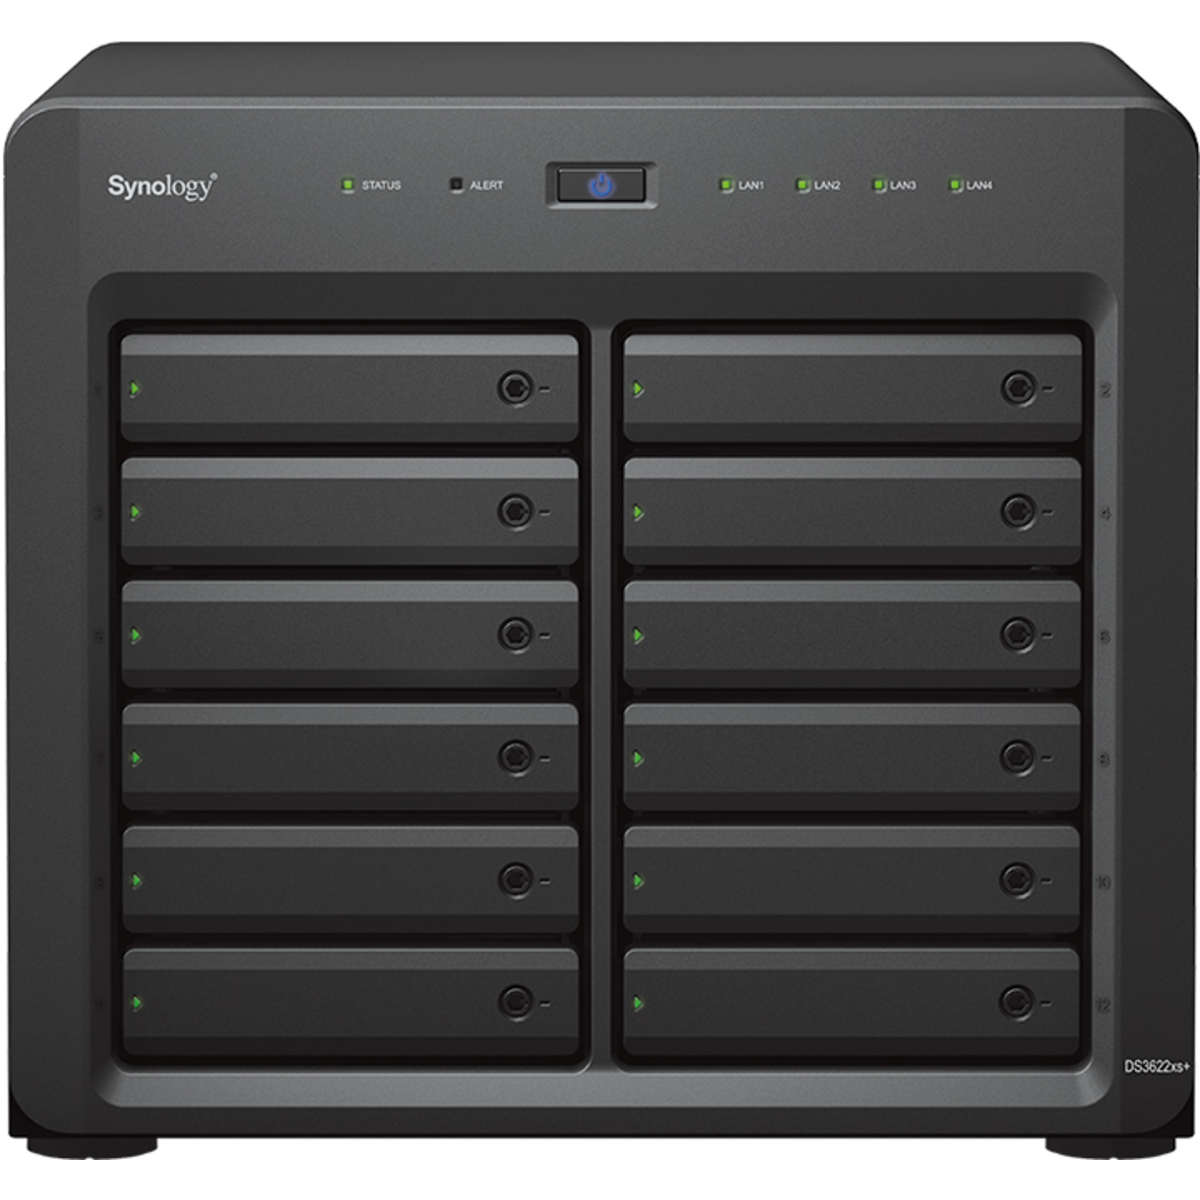 Synology DiskStation DS3622xs+ 216tb 12-Bay Desktop Multimedia / Power User / Business NAS - Network Attached Storage Device 9x24tb Western Digital Ultrastar HC580 SED WUH722424ALE6L1 3.5 7200rpm SATA 6Gb/s HDD ENTERPRISE Class Drives Installed - Burn-In Tested DiskStation DS3622xs+